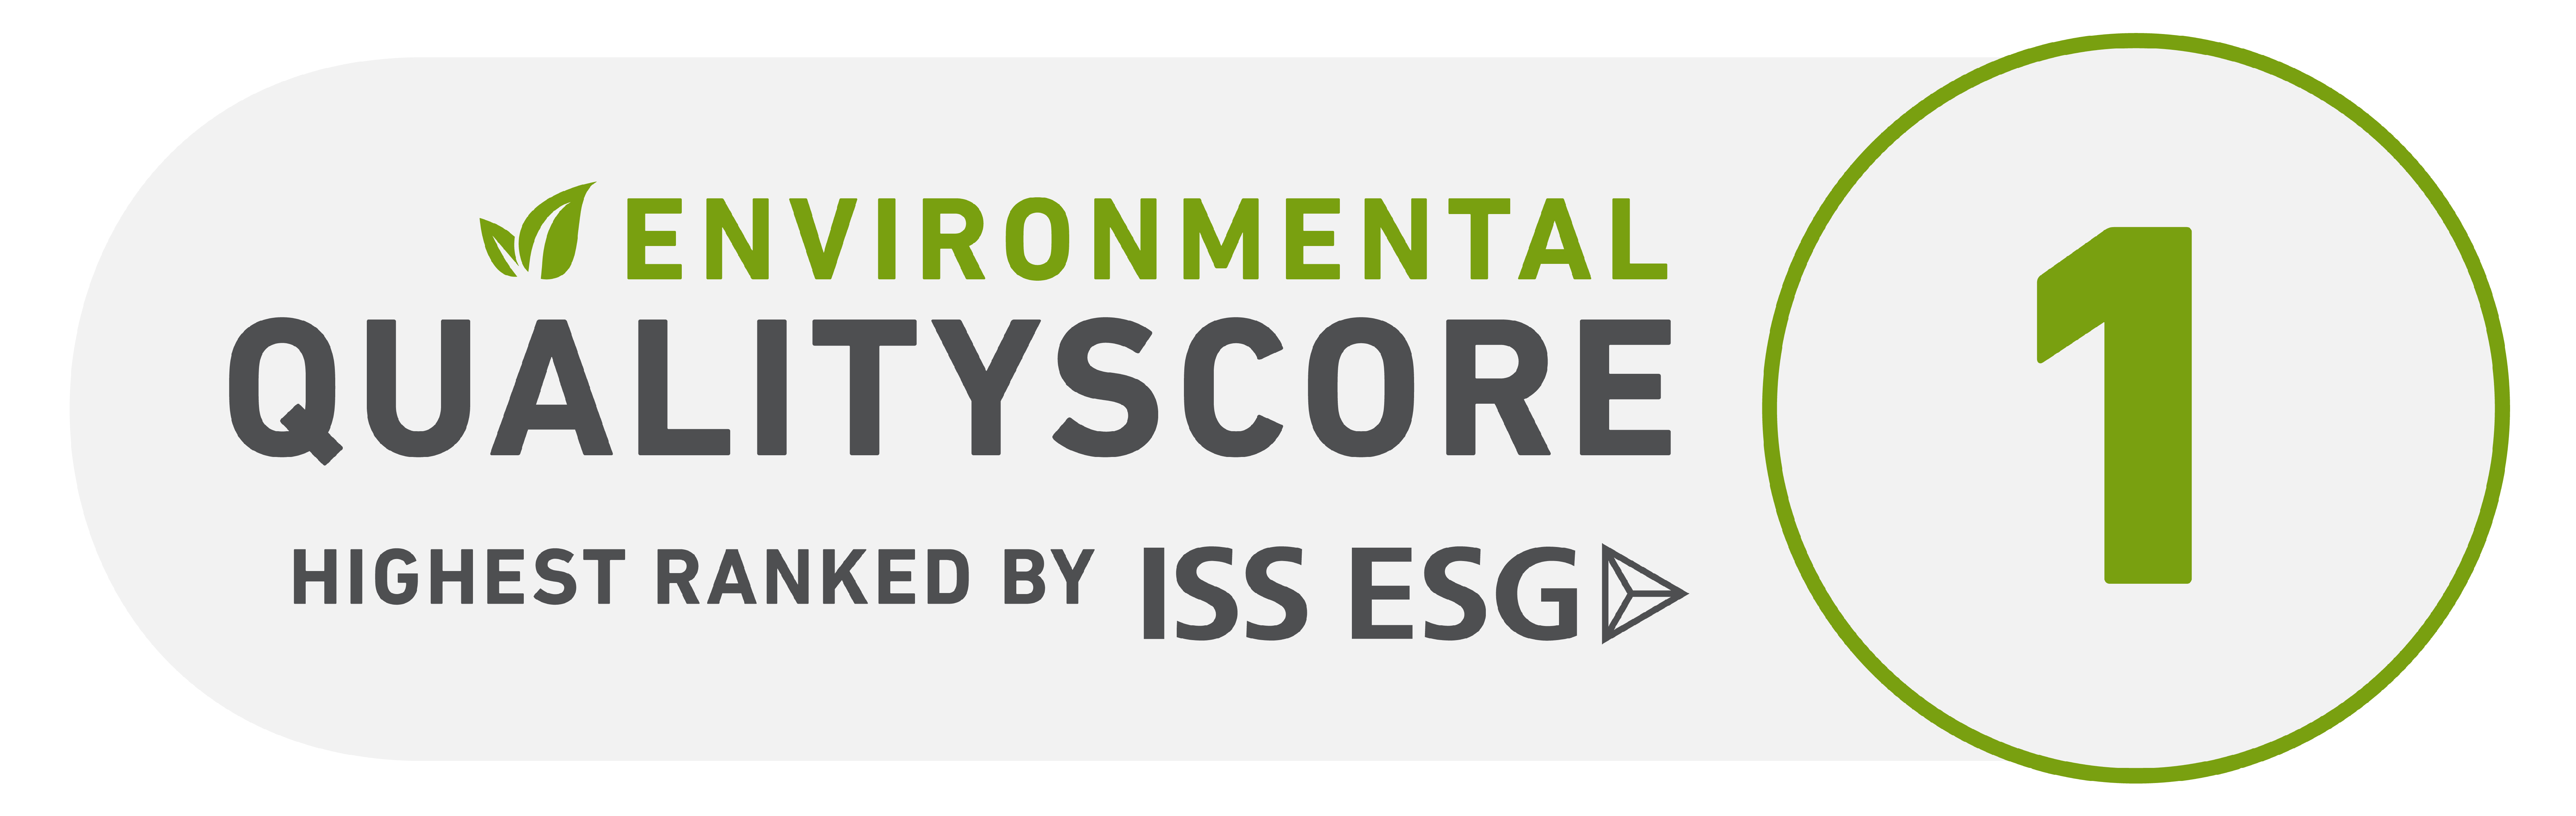 Environmental Quality Score 1 - Highest Ranked by ISS ESG